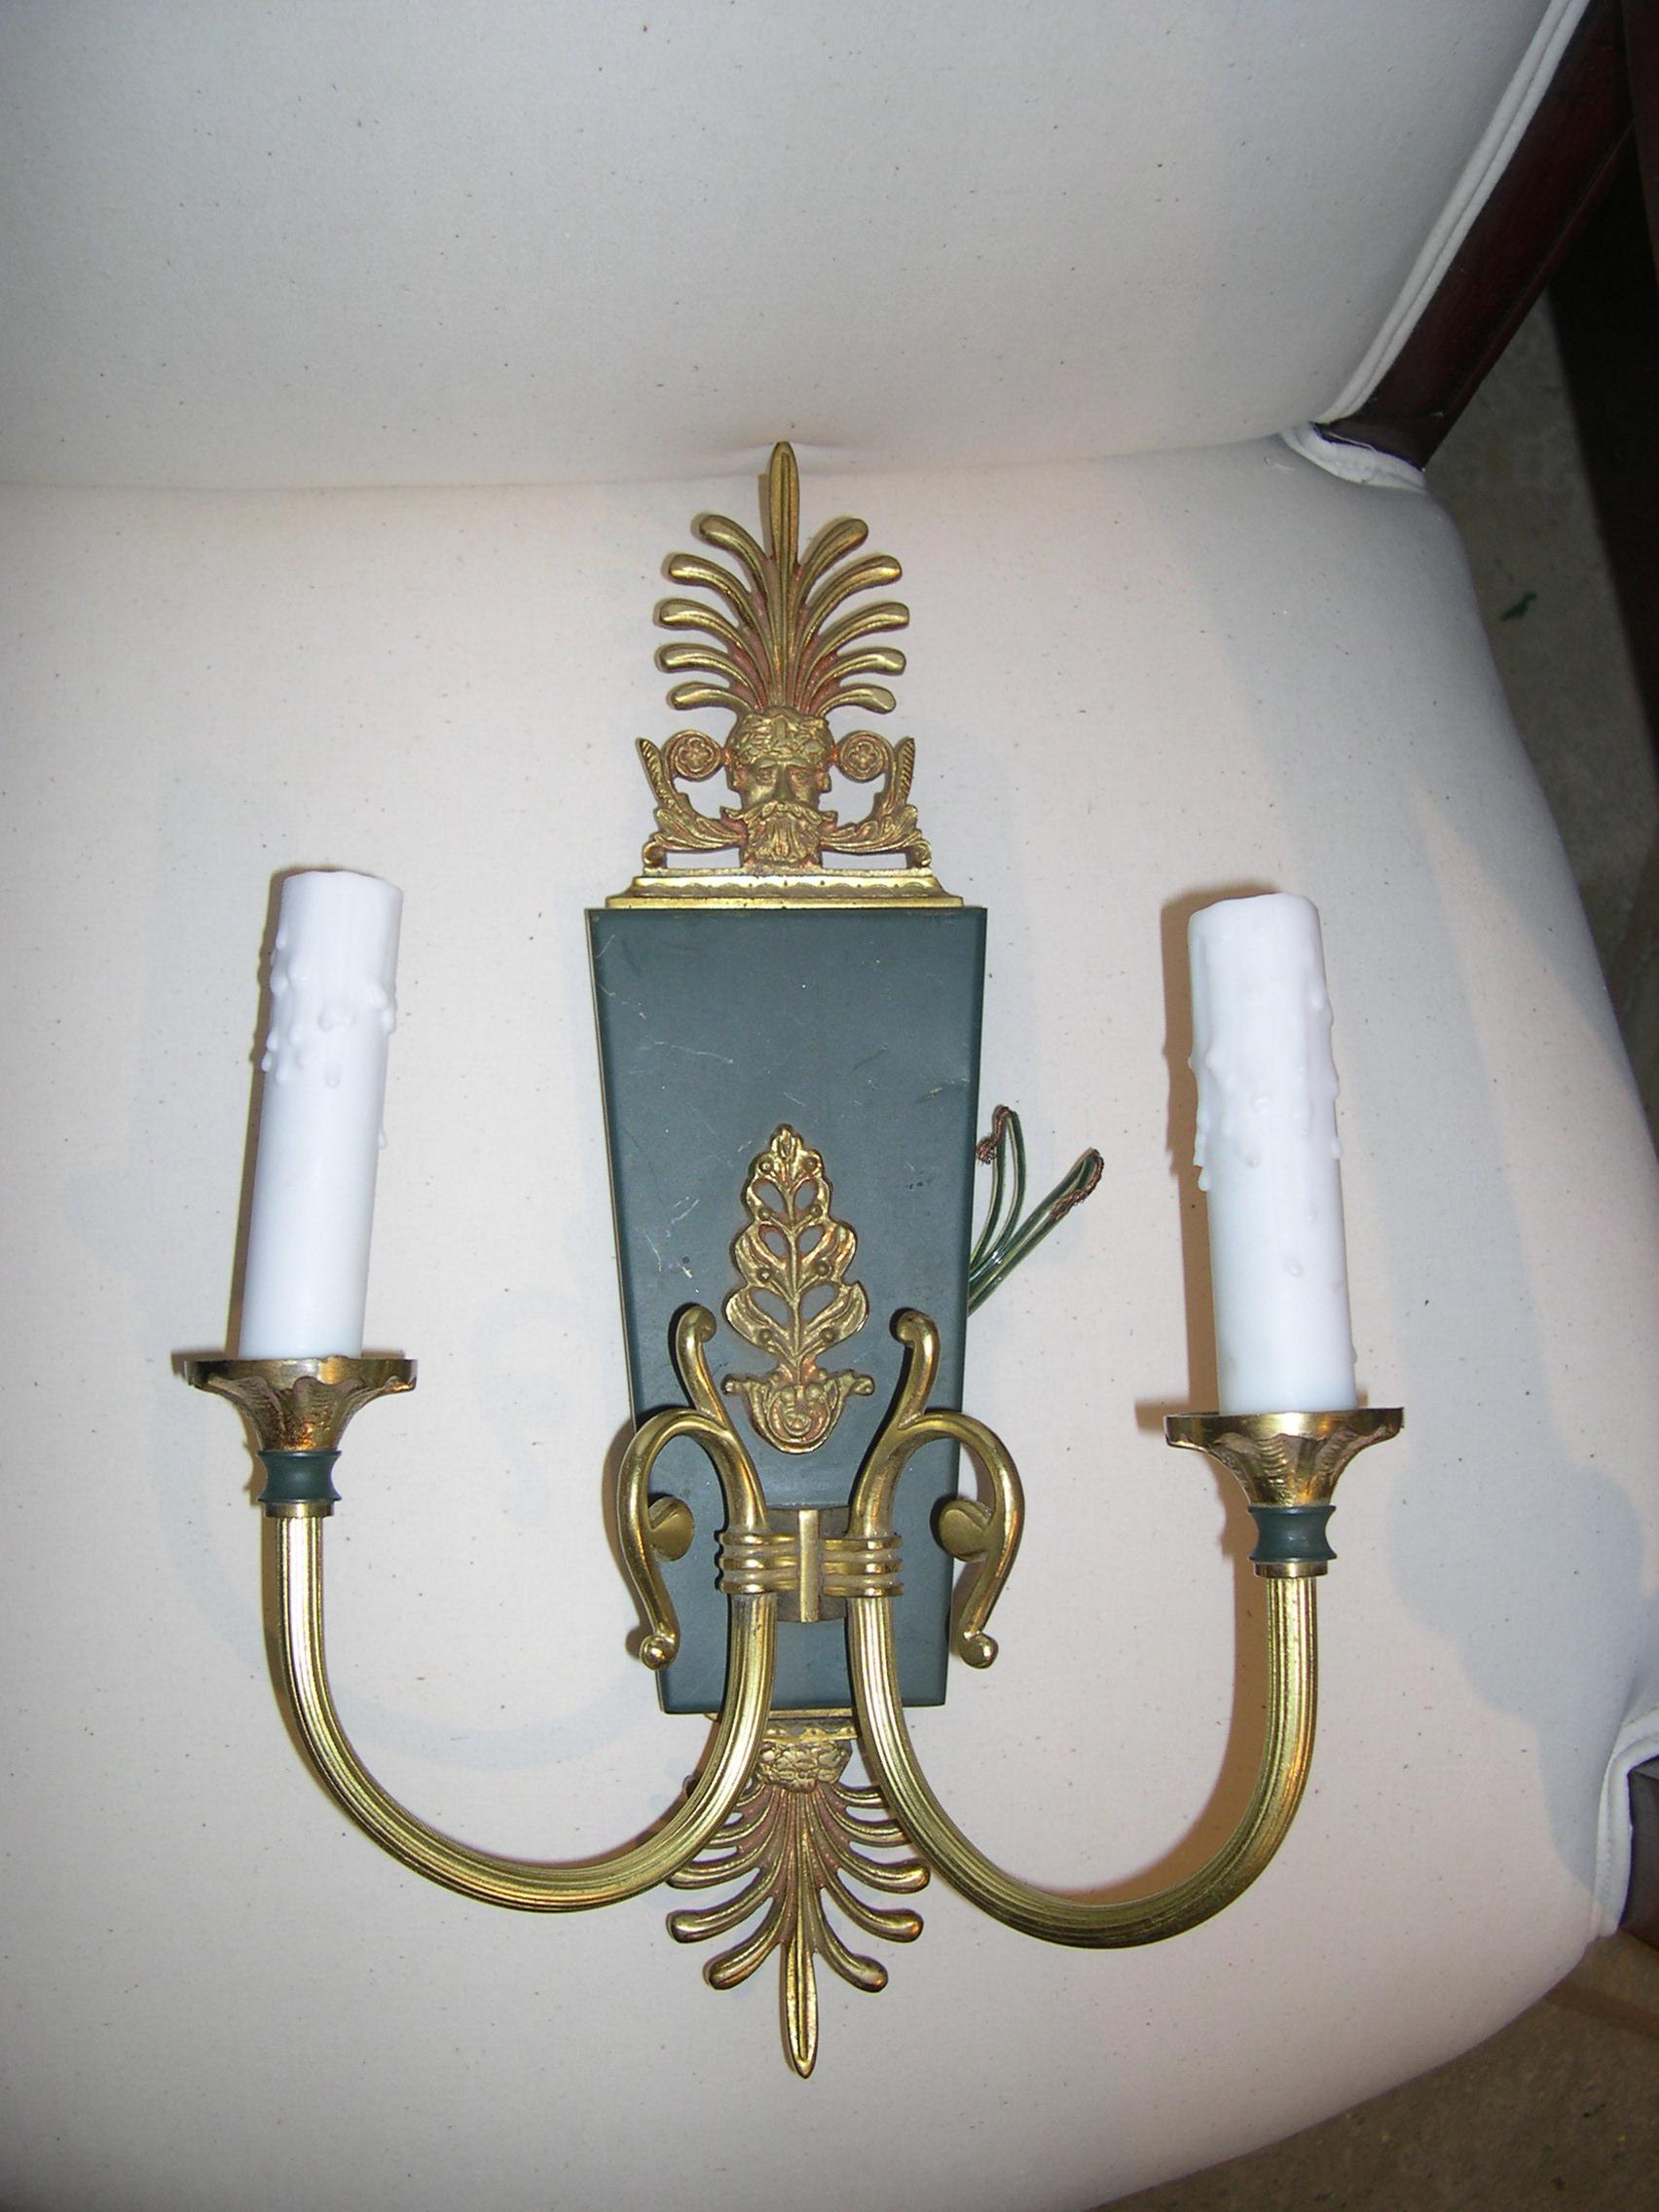 20th century Regency style sconce
New wiring.